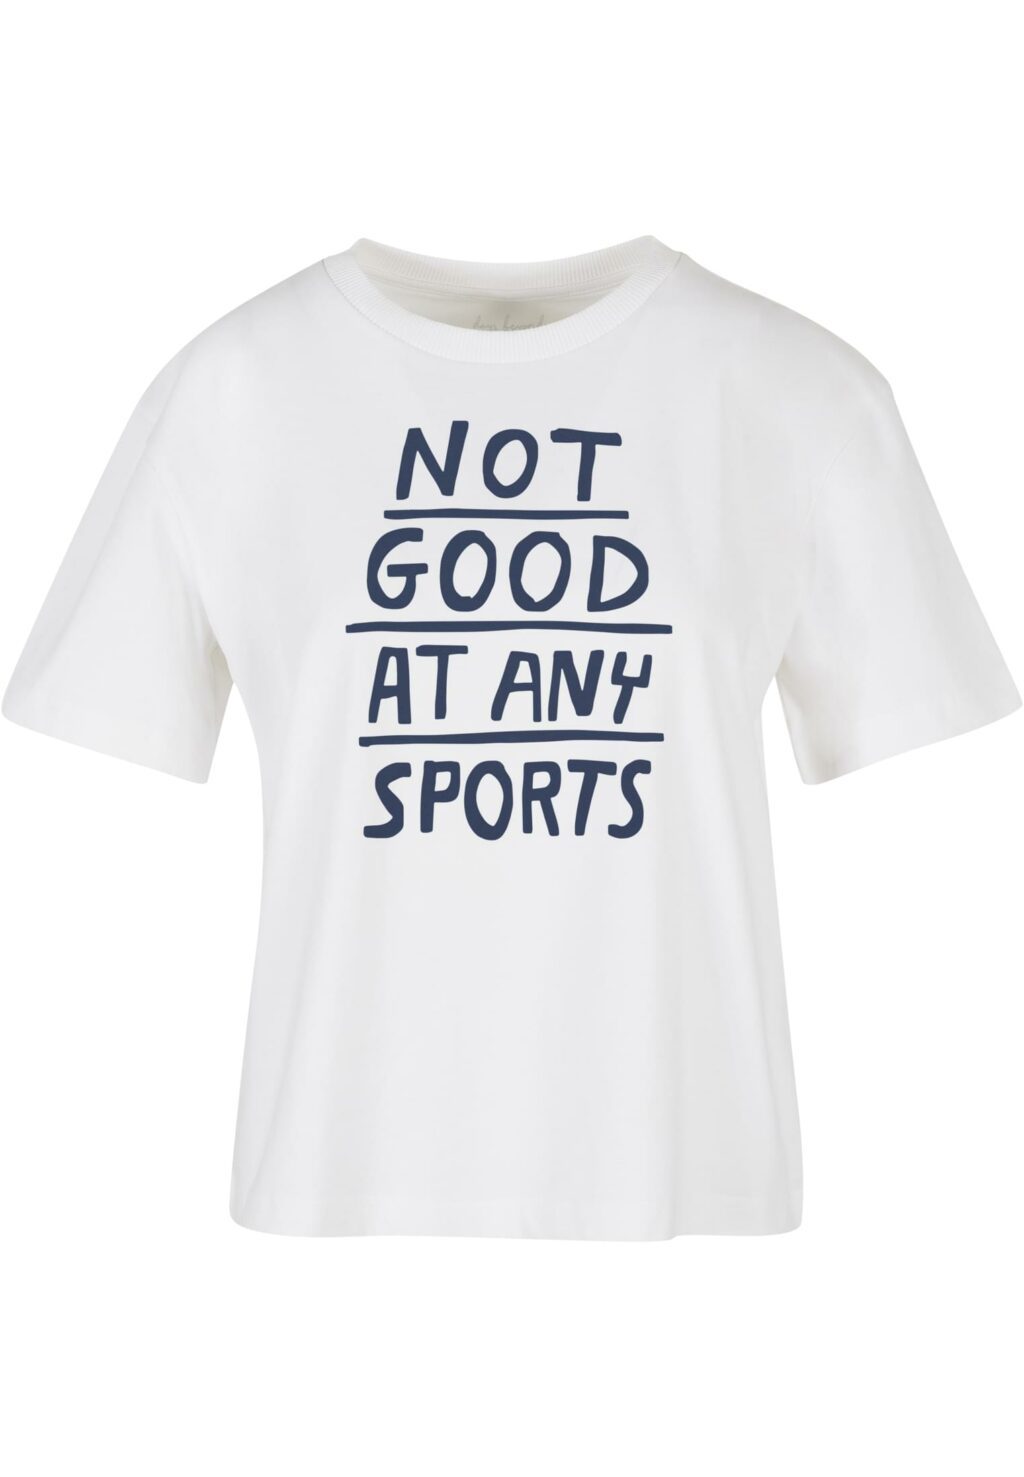 Not Good At Any Sports Tee white BE045